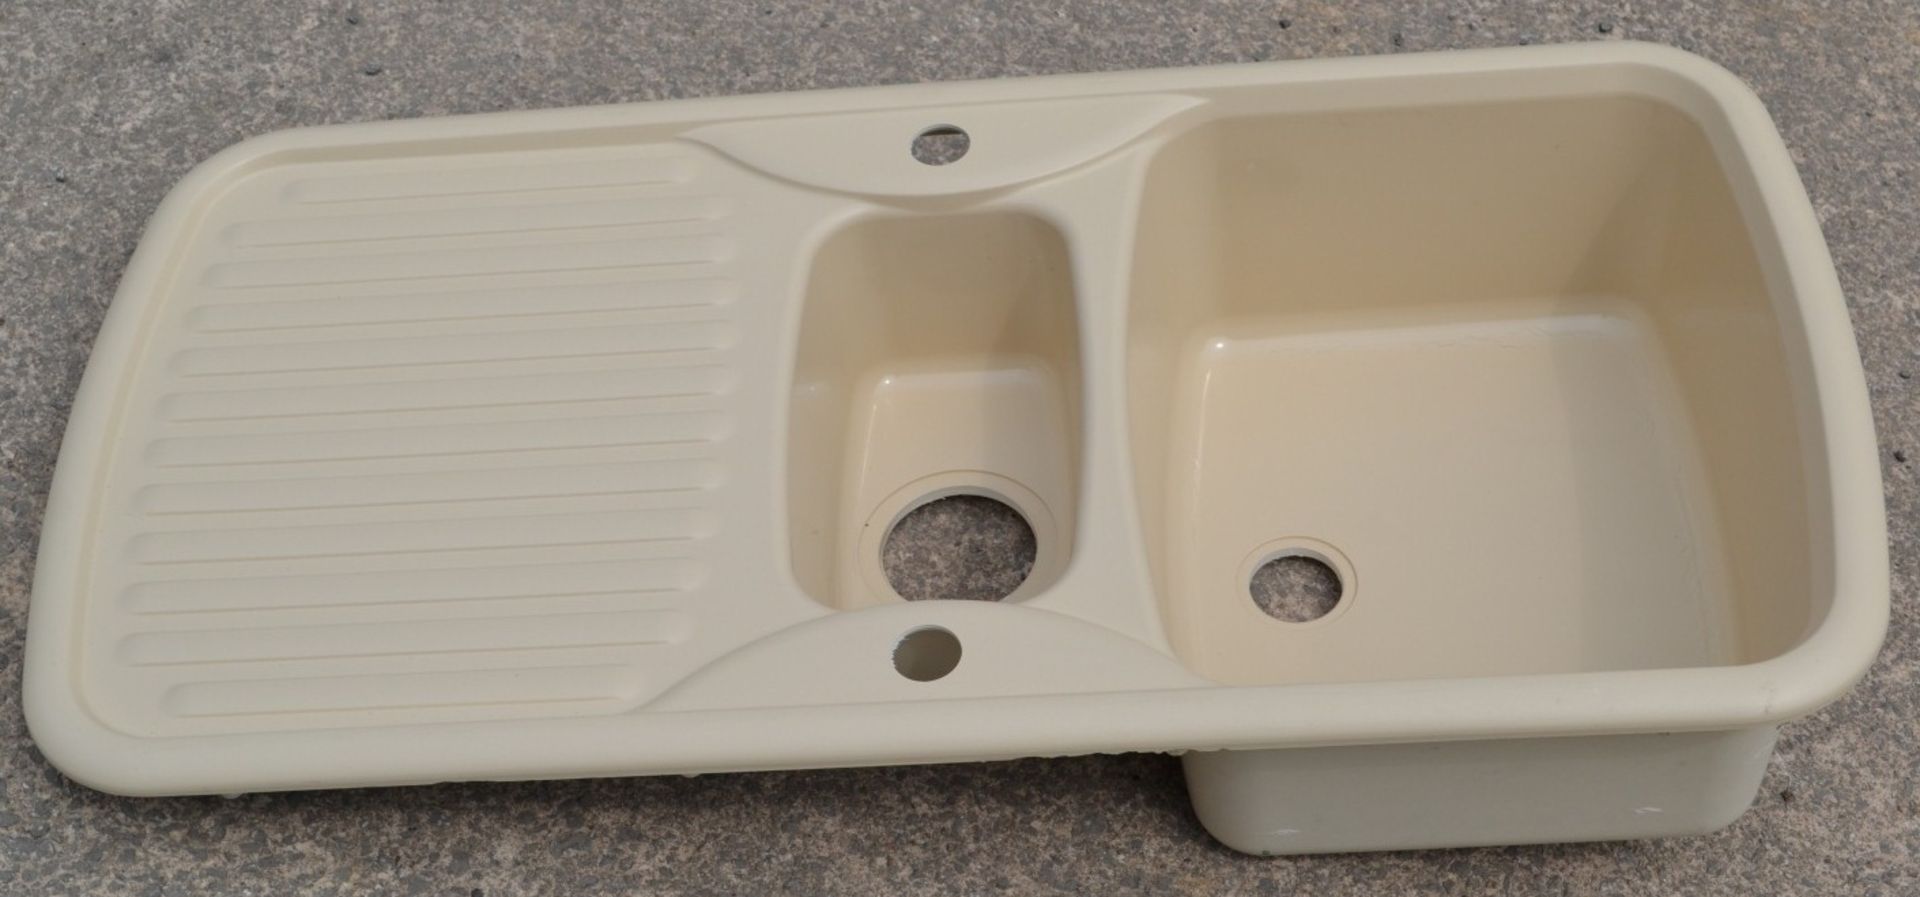 5 x Acrylic 1.5 Bowl Kitchen Sinks In Beige - New / Unused Stock - Dimensions: 97 x 49cm - Image 3 of 3